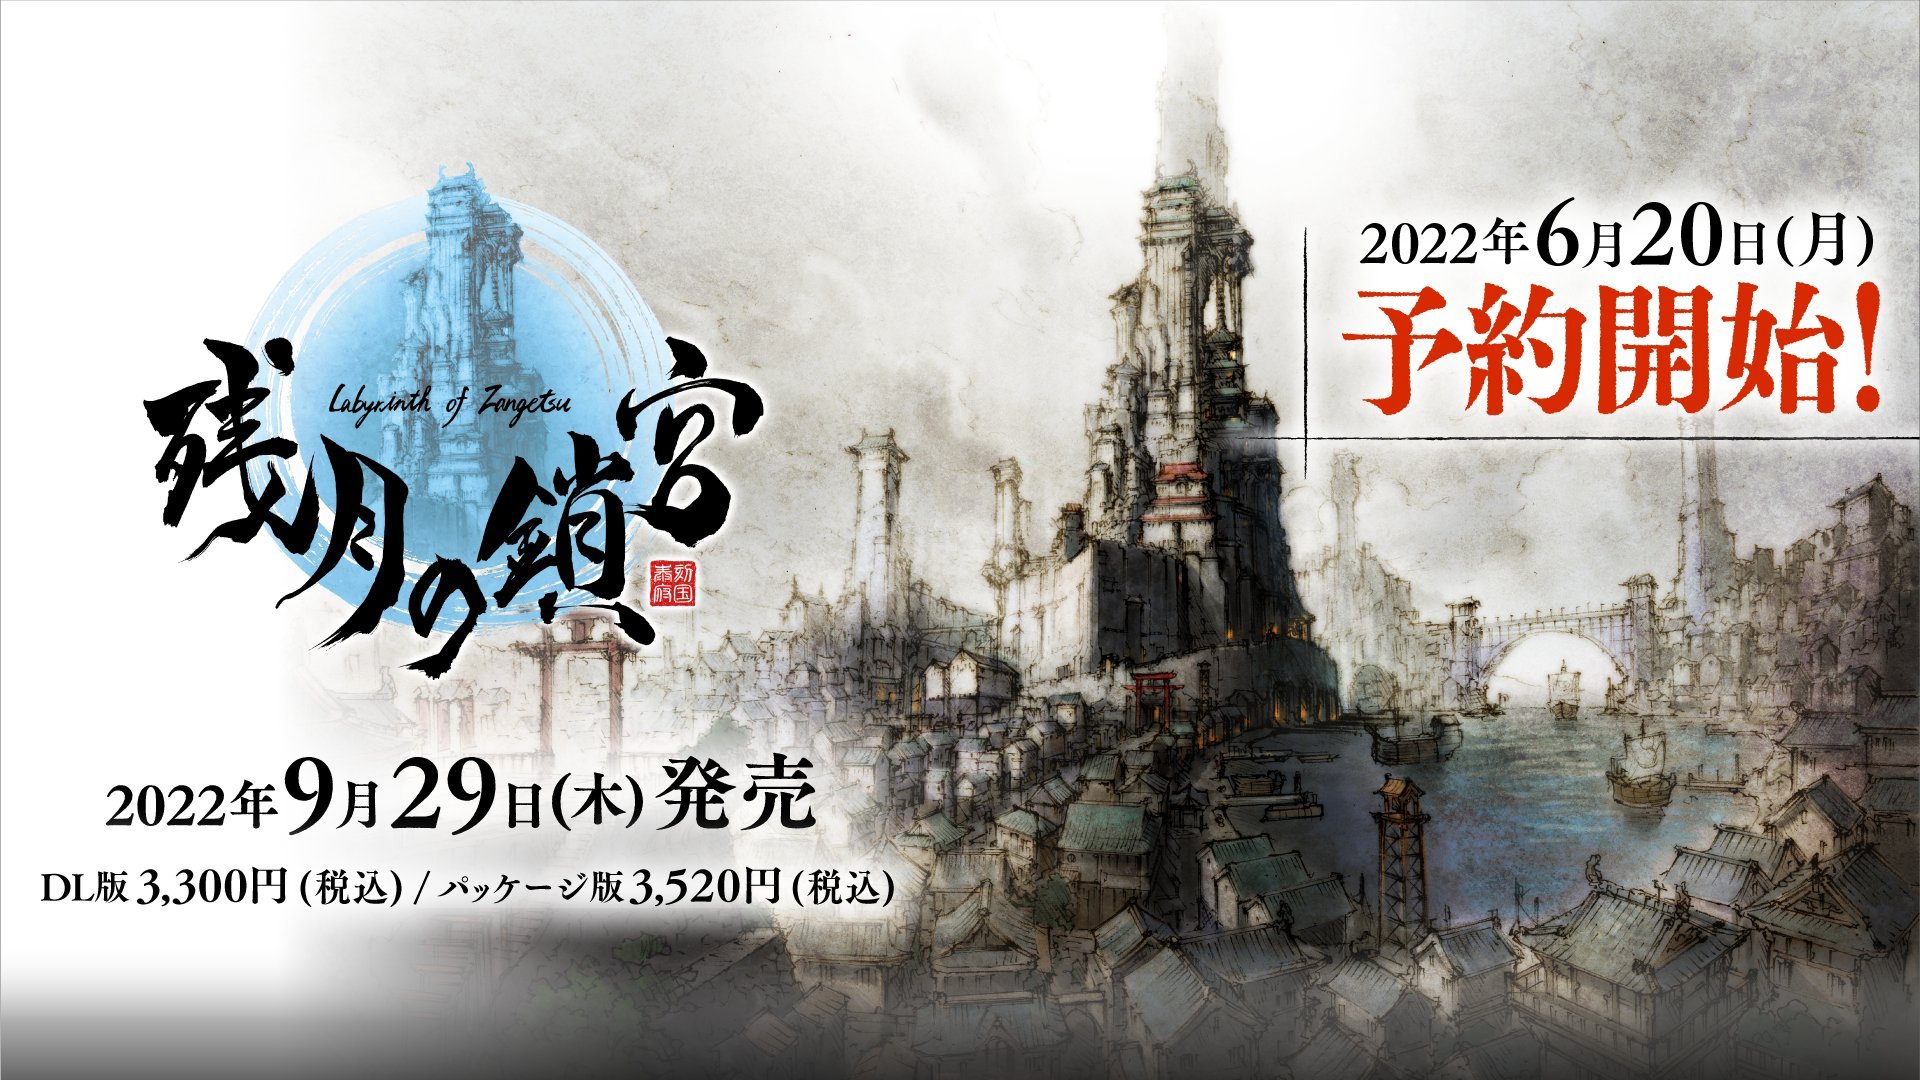 #
      Labyrinth of Zangetsu launches September 29 in Japan